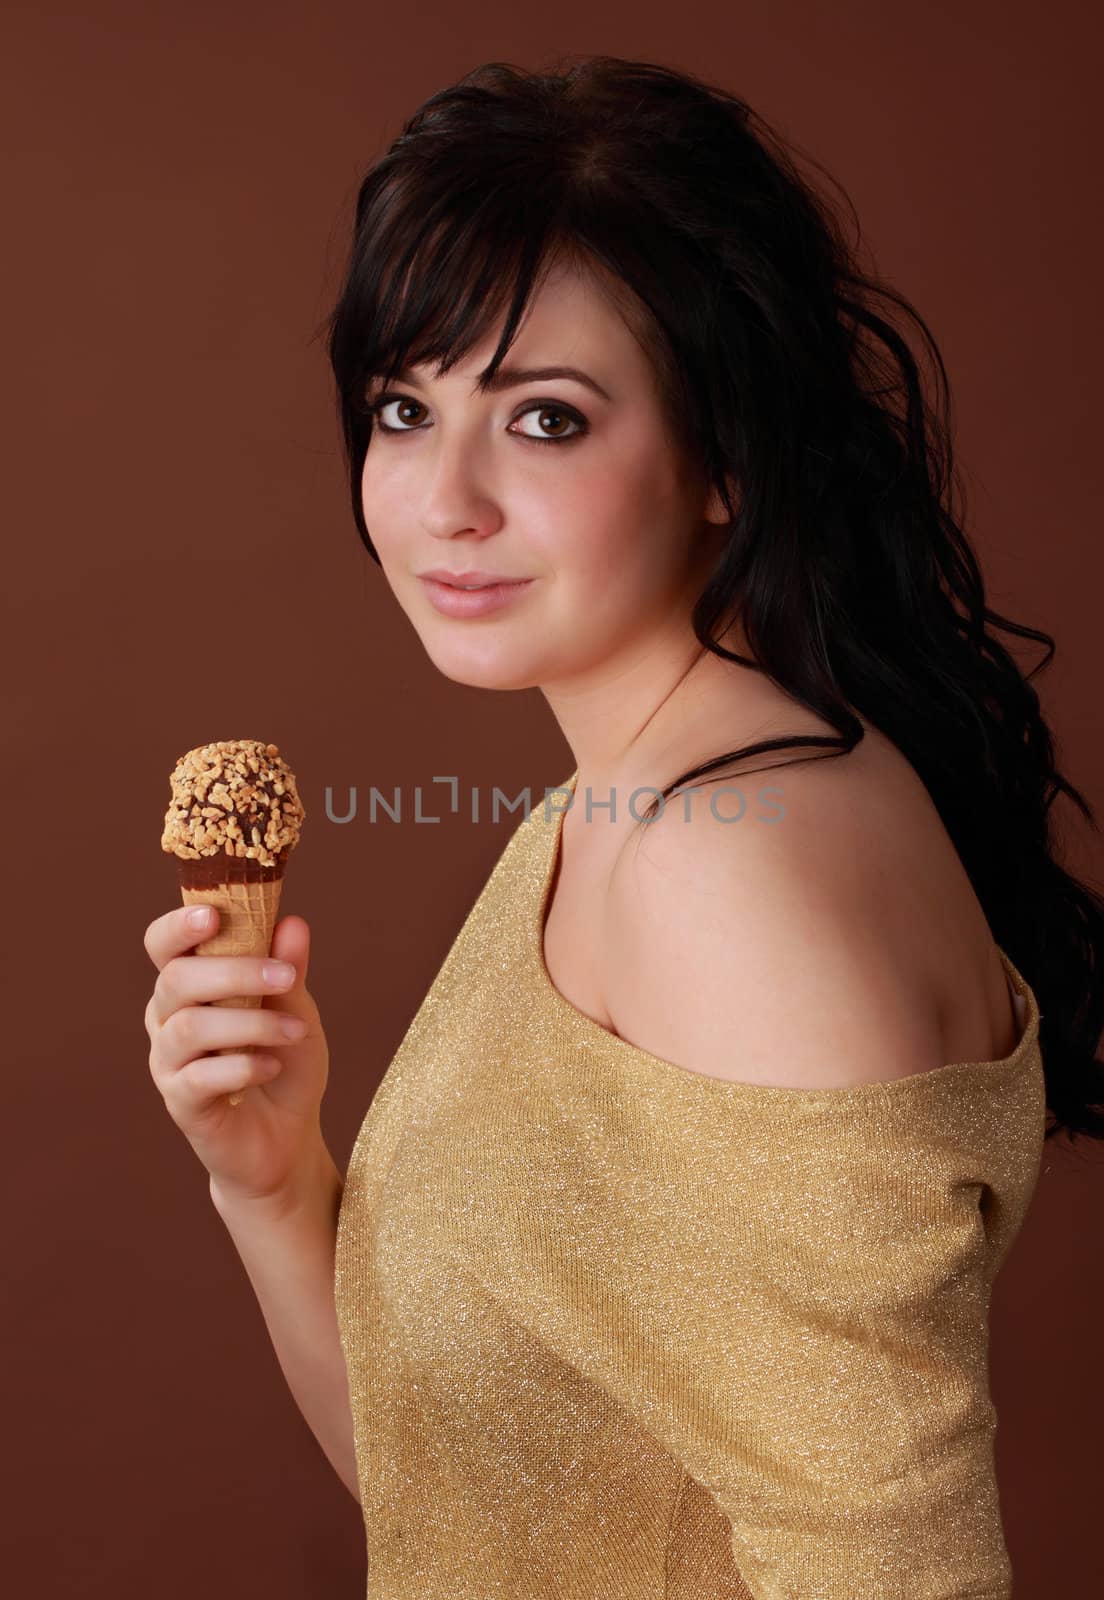 woman with ice cream by lanalanglois